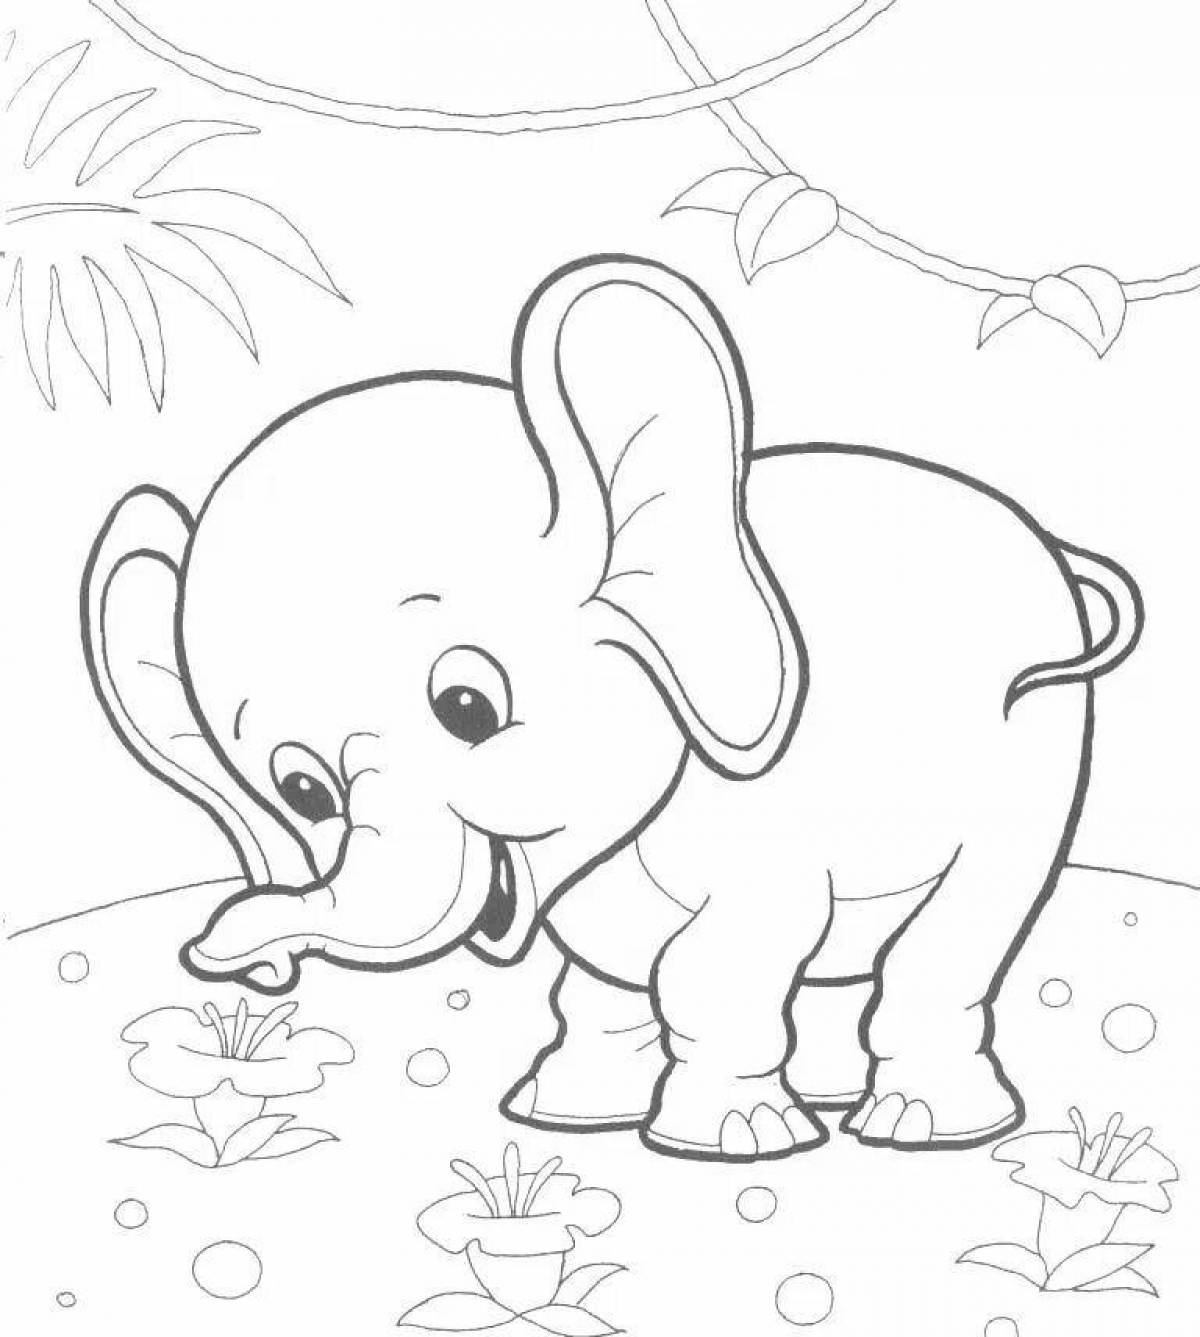 Charming coloring book for children animals of hot countries